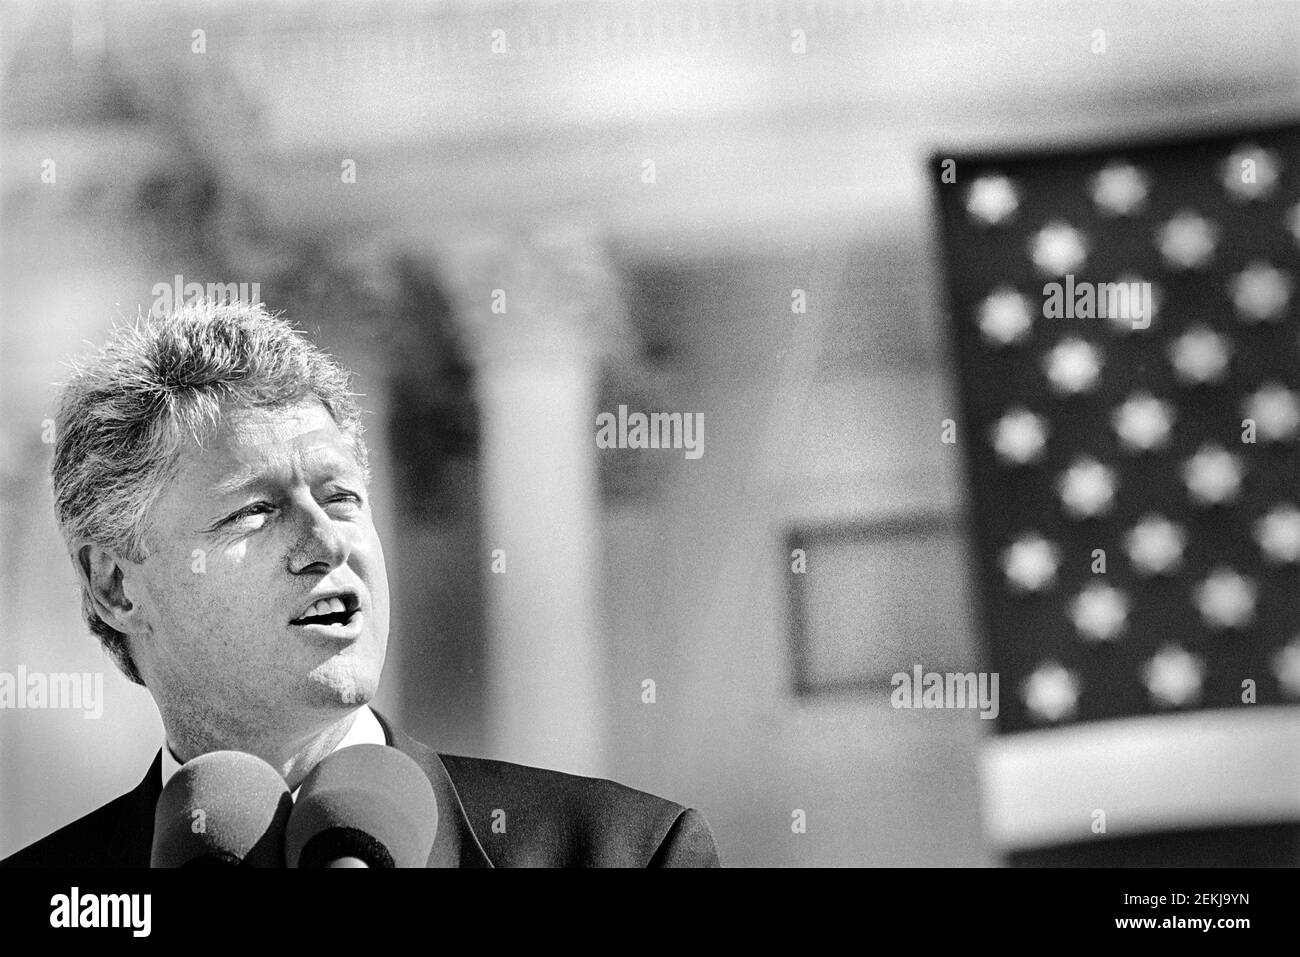 U.S. President Bill Clinton speaking into Microphone at U.S. Capitol during Ceremony for return of Statue of Freedom to the top of U.S. Capitol, Washington, D.C., USA, Maureen Keating, October 1993 Stock Photo